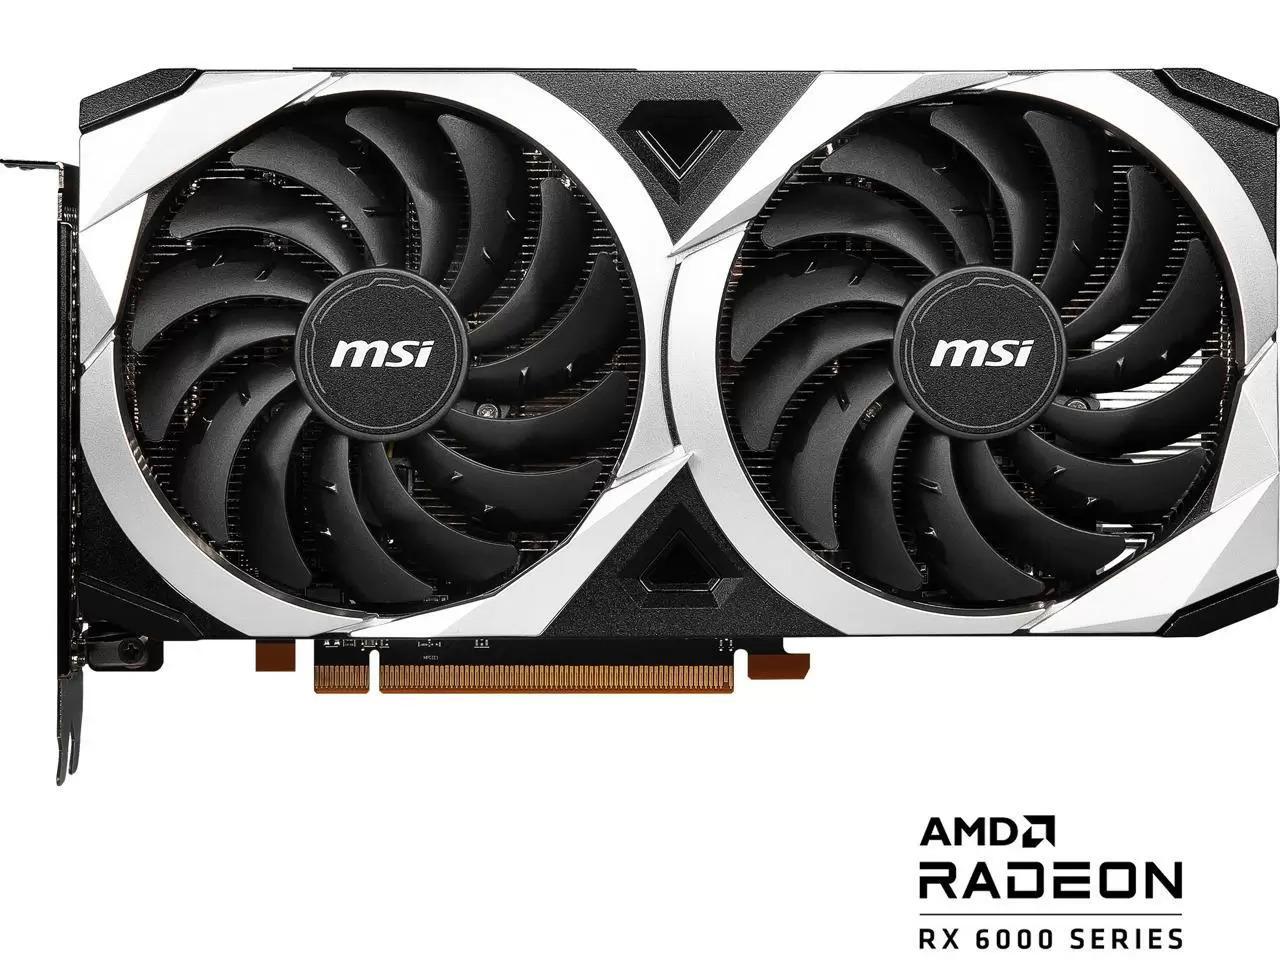 MSI Mech Radeon RX 6650 XT 8GB GDDR6 PCIe 4.0 Graphics Card for $209.99 Shipped